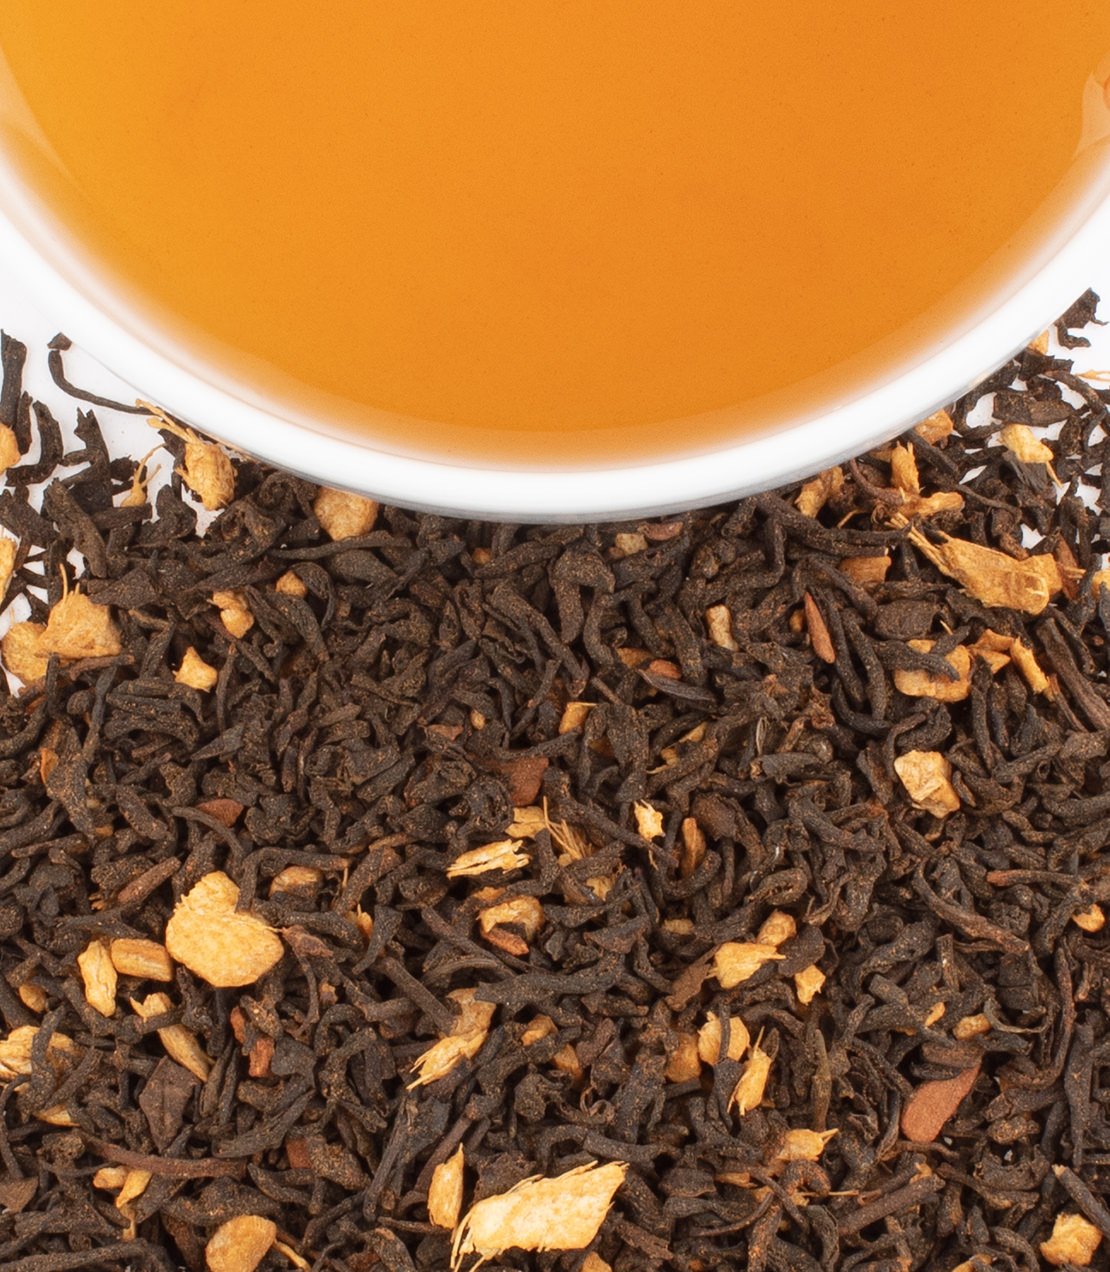 Black tea with ginger root, cloves, and cinnamon, flavoured with natural molasses and vanilla - Gingerbread Festival Tea by Harney & Sons Fine Teas Europe.